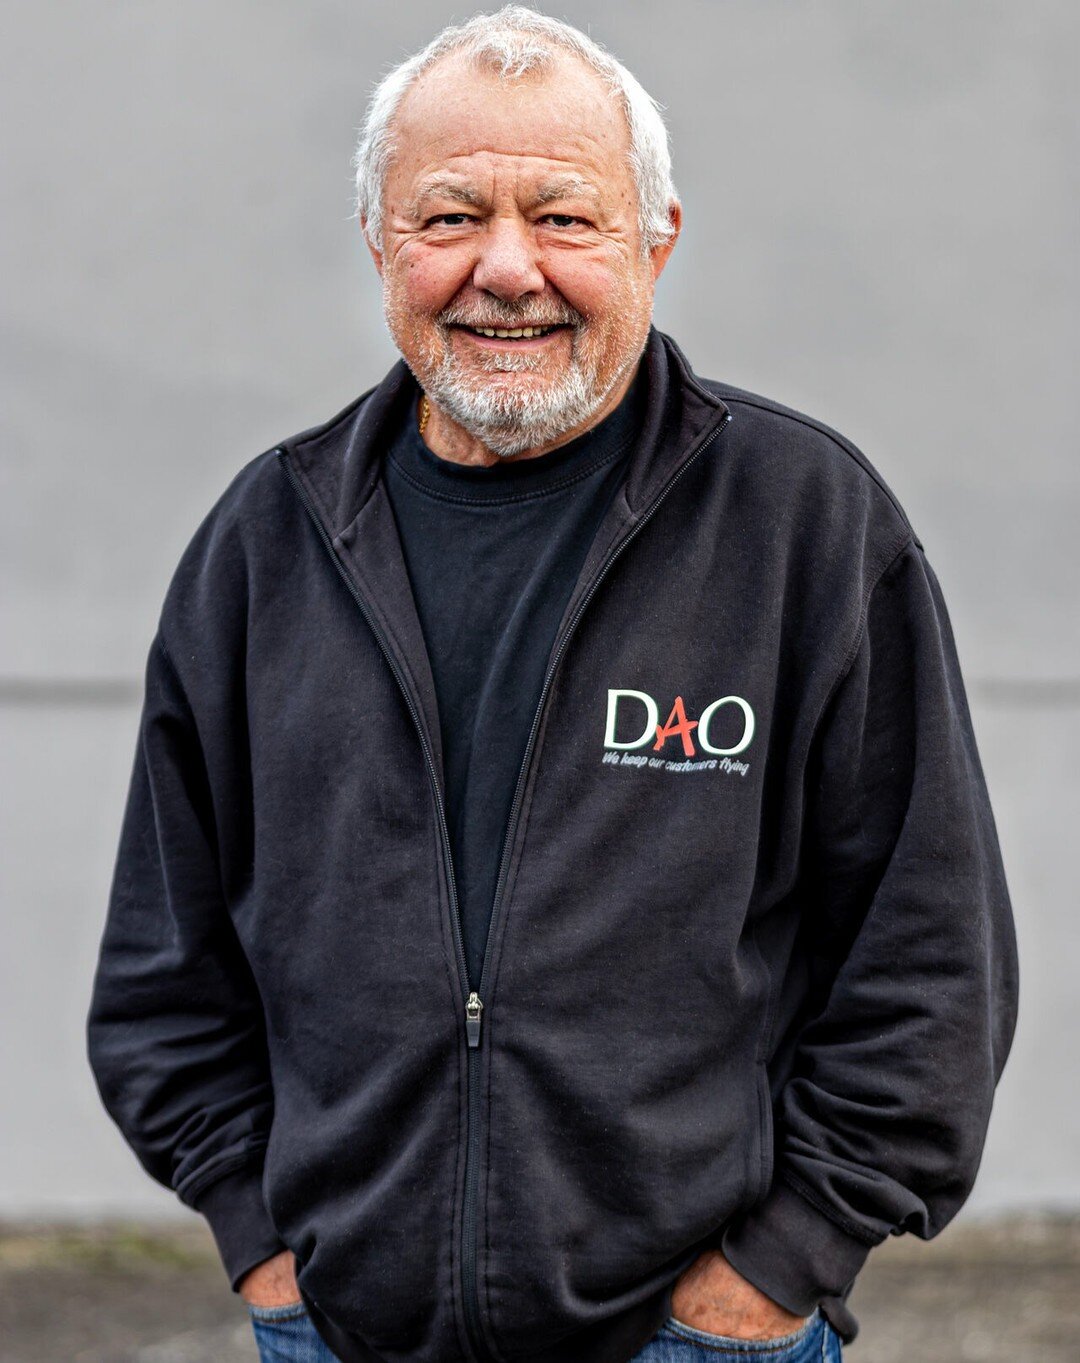 DAO Aviation is proud and honored to announce the pension retirement of our long-lasting colleague Allan K B Jensen. Thank you for the pleasure of having you and your knowledge at DAO Aviation! We will all miss you forever. May you have long lasting 